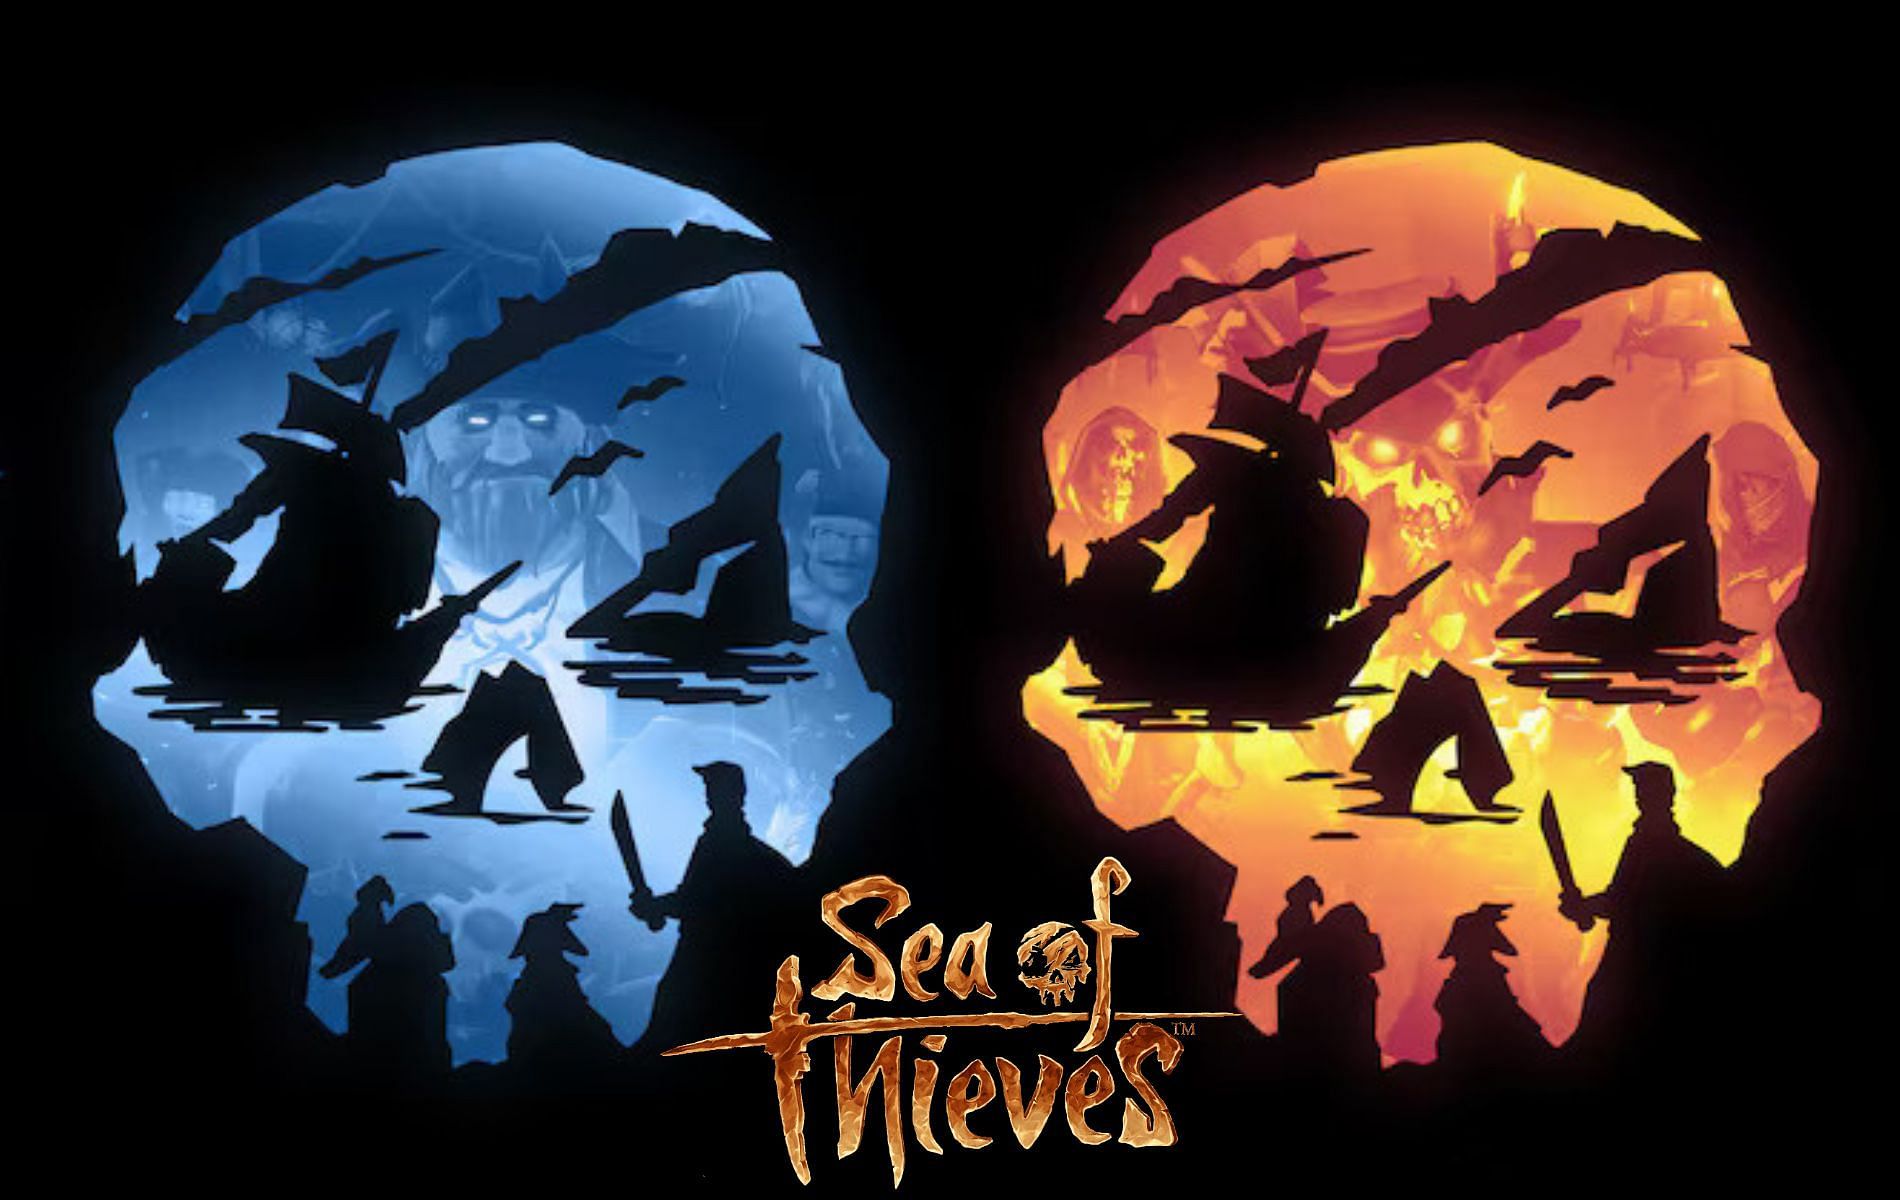 Deluxe vs Premium: Which Sea of Thieves edition should you get?